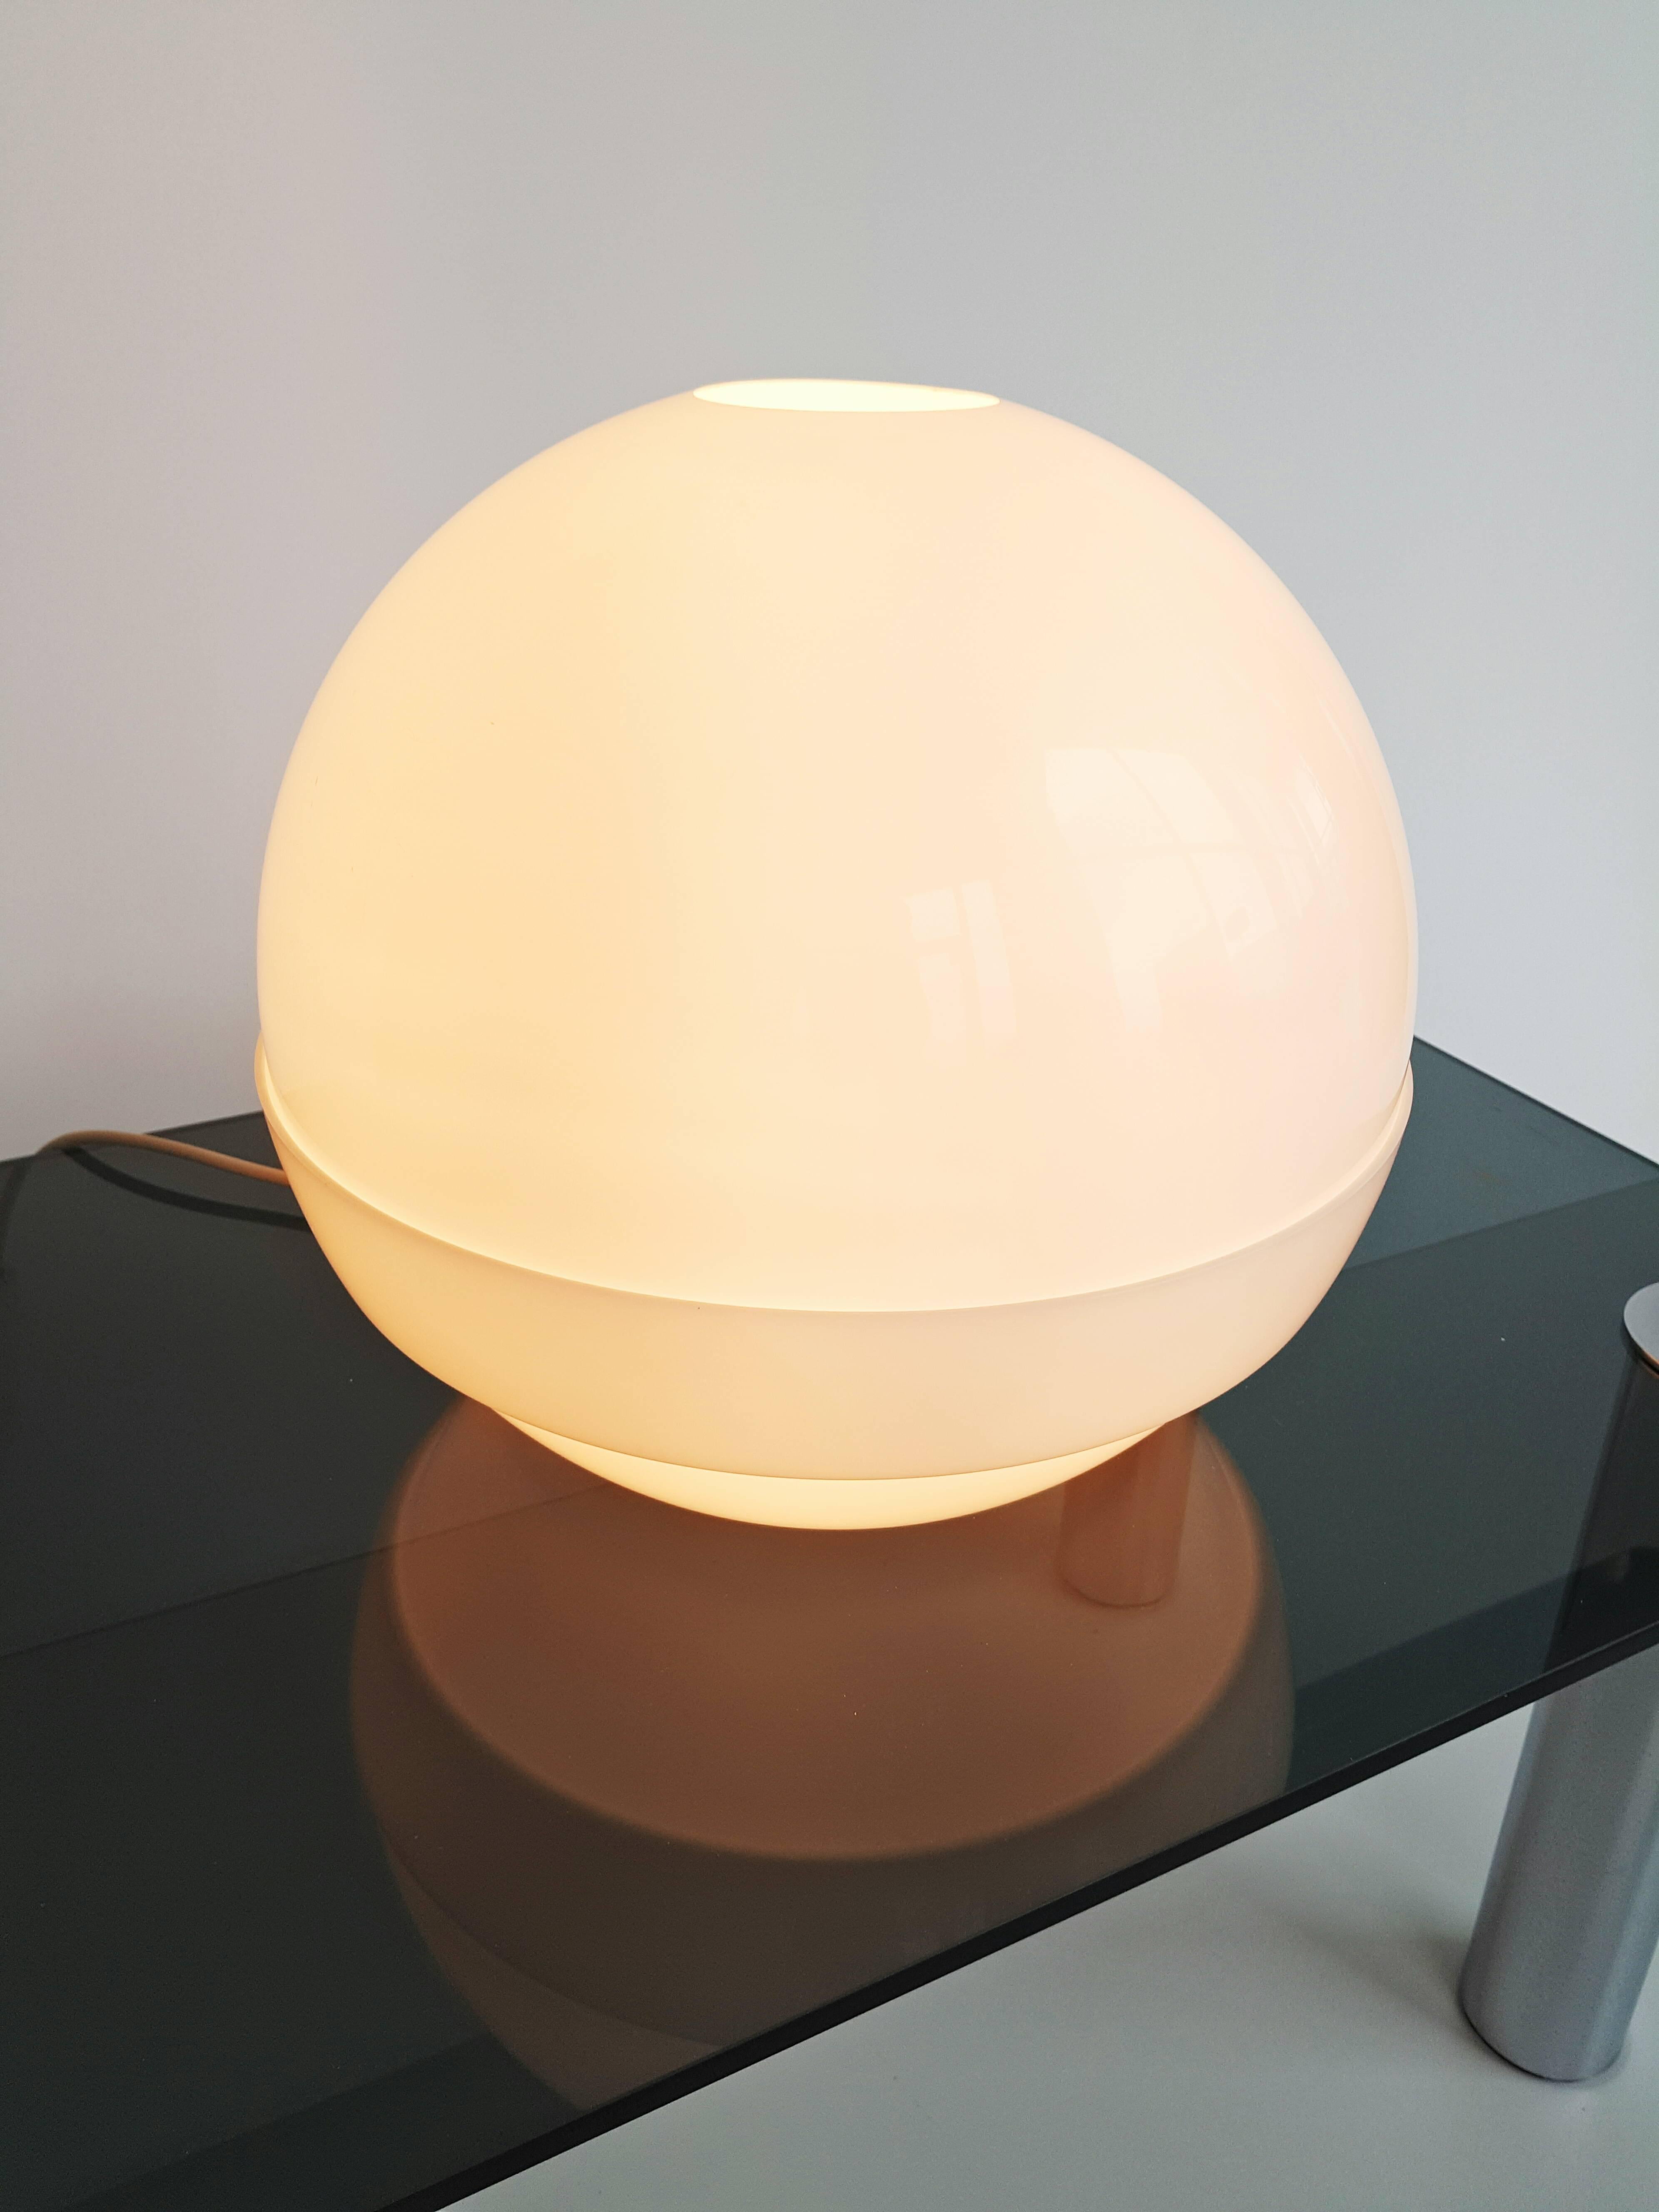 Spanish Rare Lamp Ball by André Ricard for Metalarte 1970s For Sale